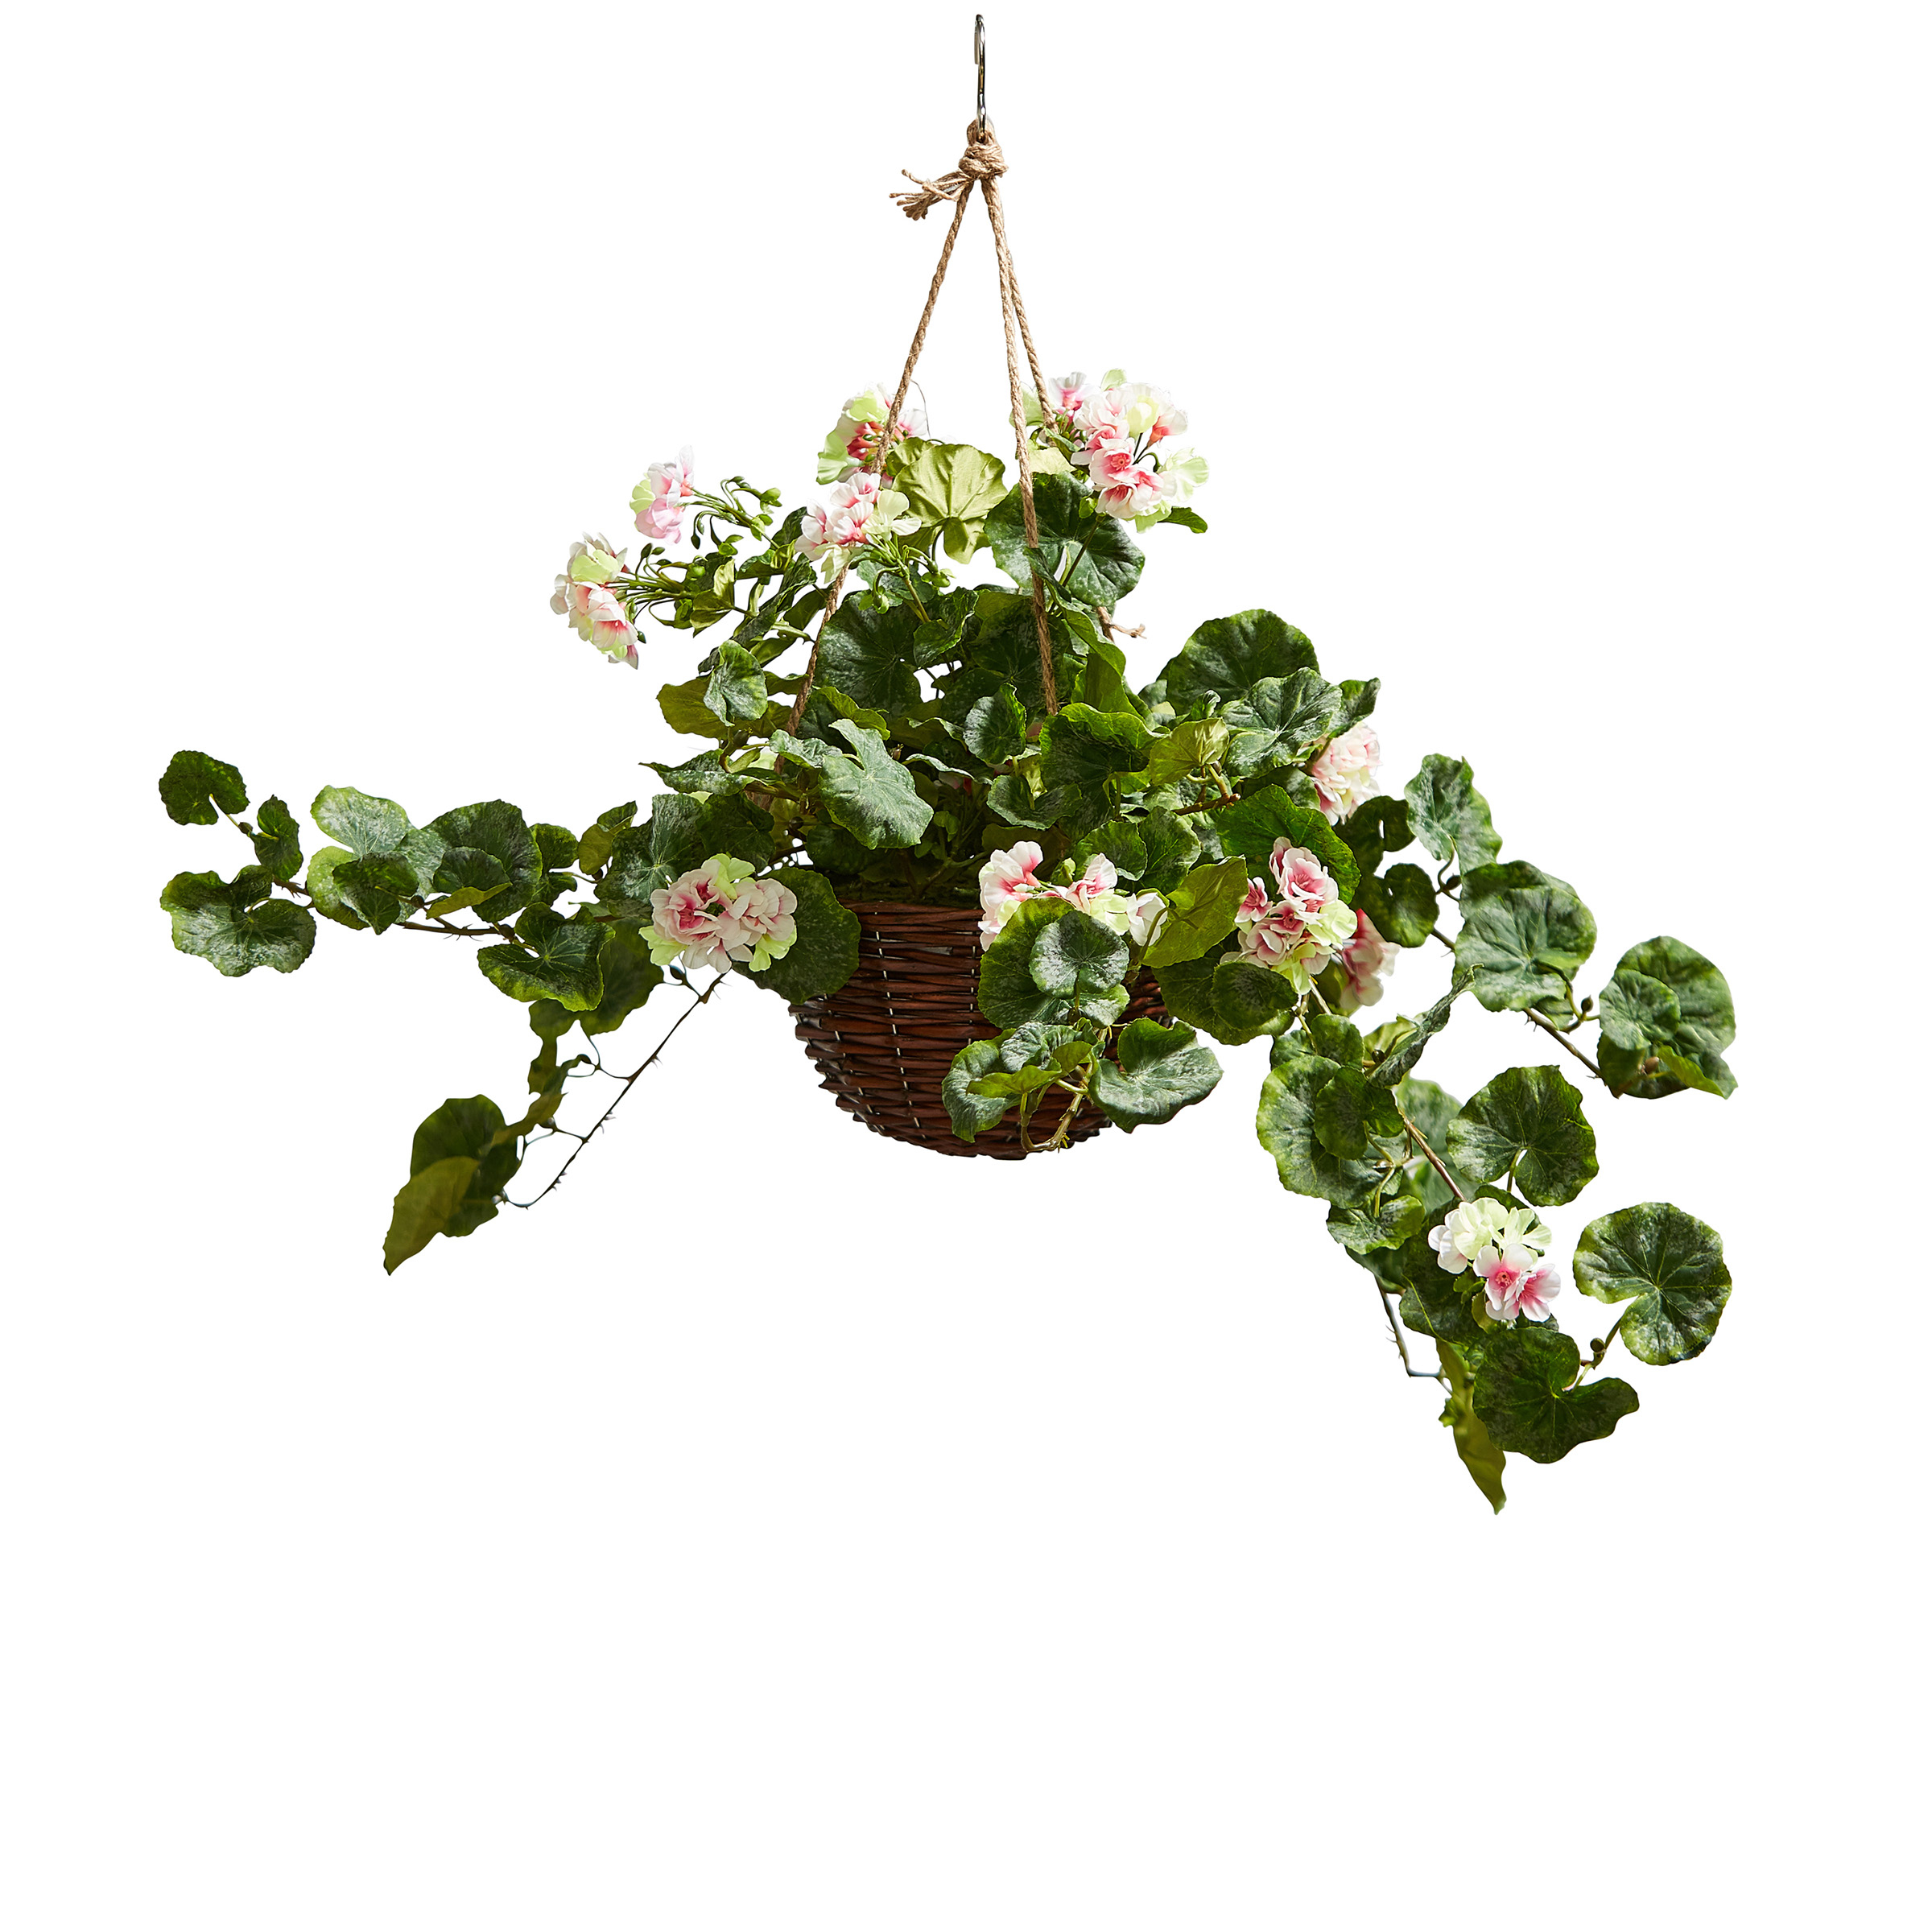 Faux Flower Basket Fake Geranium Hanging Basket Indoor Covered Outdoor Floral Arrangement Home Office Patio - Pink And White